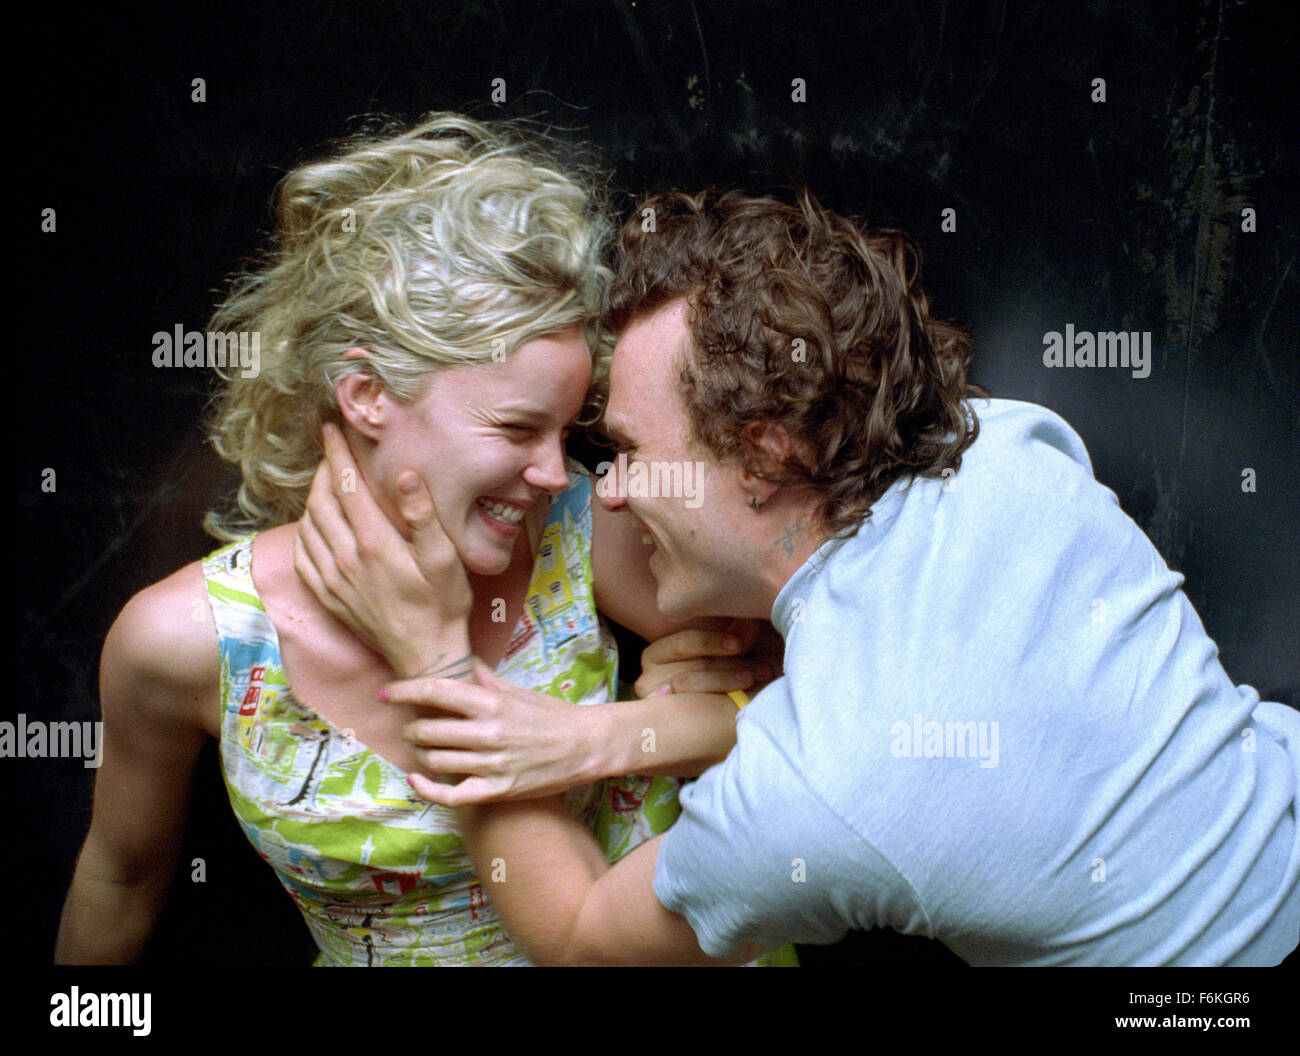 RELEASED: Feb 15, 2006 - Original Film Title: Candy.  PICTURED: Actress ABBIE CORNISH and actor HEATH LEDGER. Stock Photo